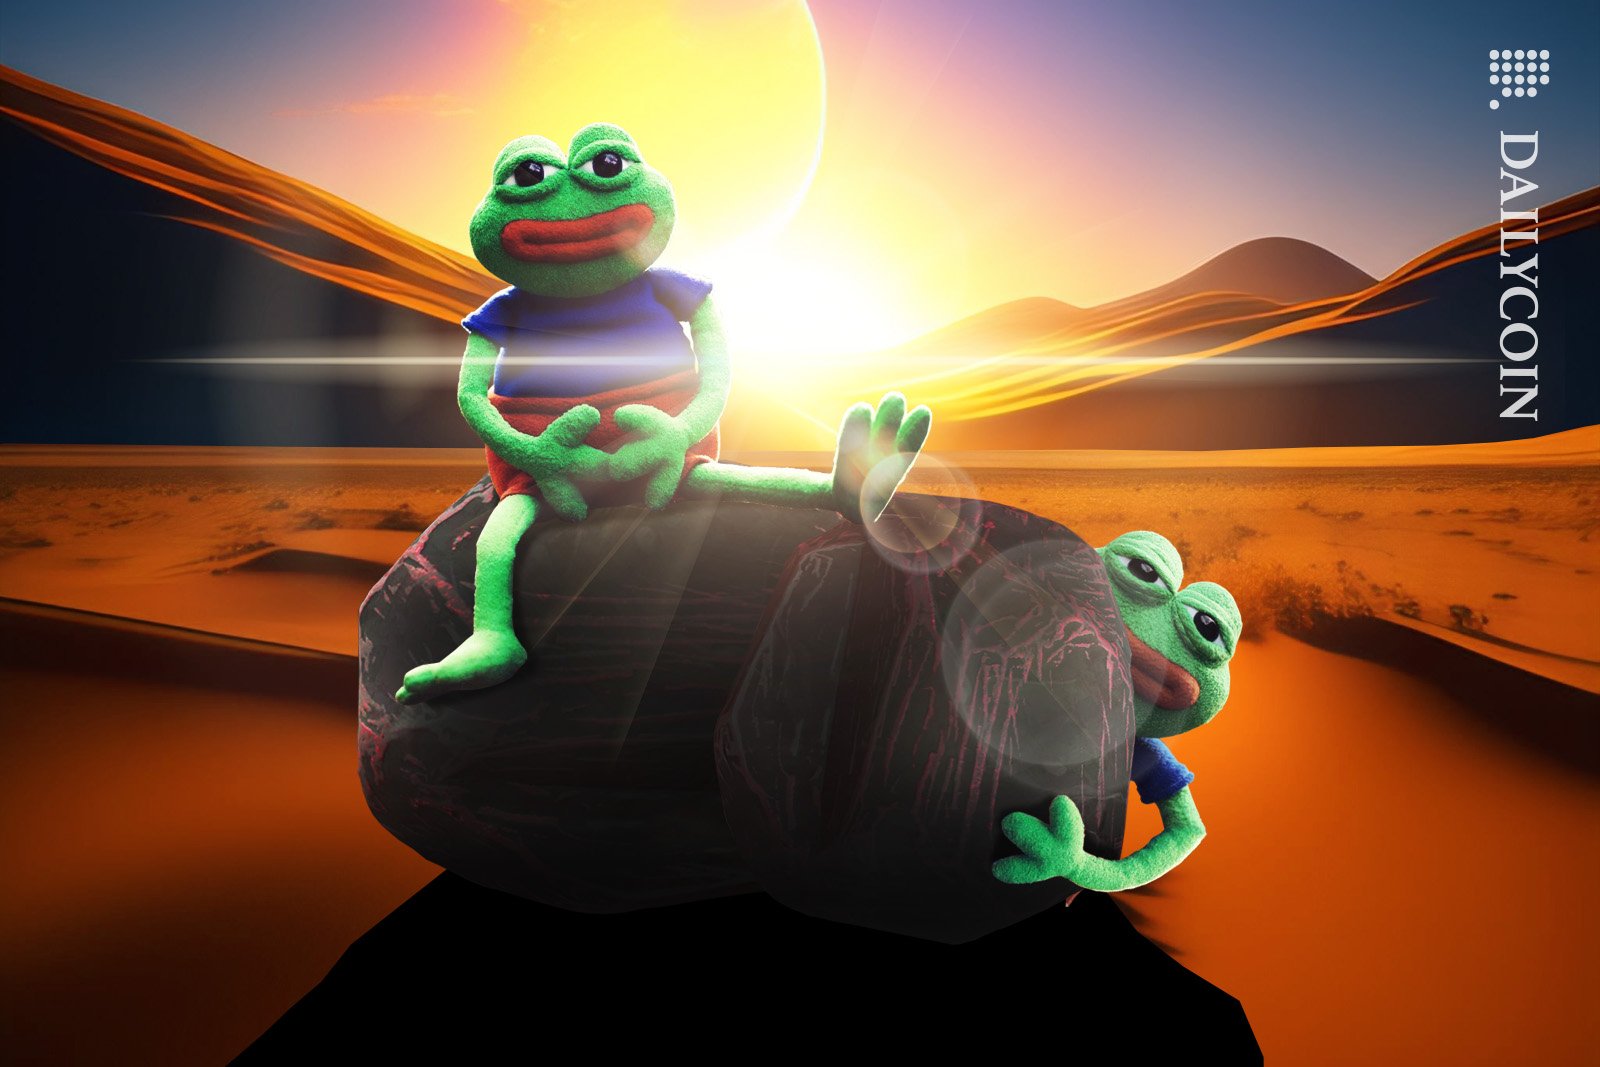 Suspiciously looking Pepe frog puppets are hiding behind a rock in the dessert.